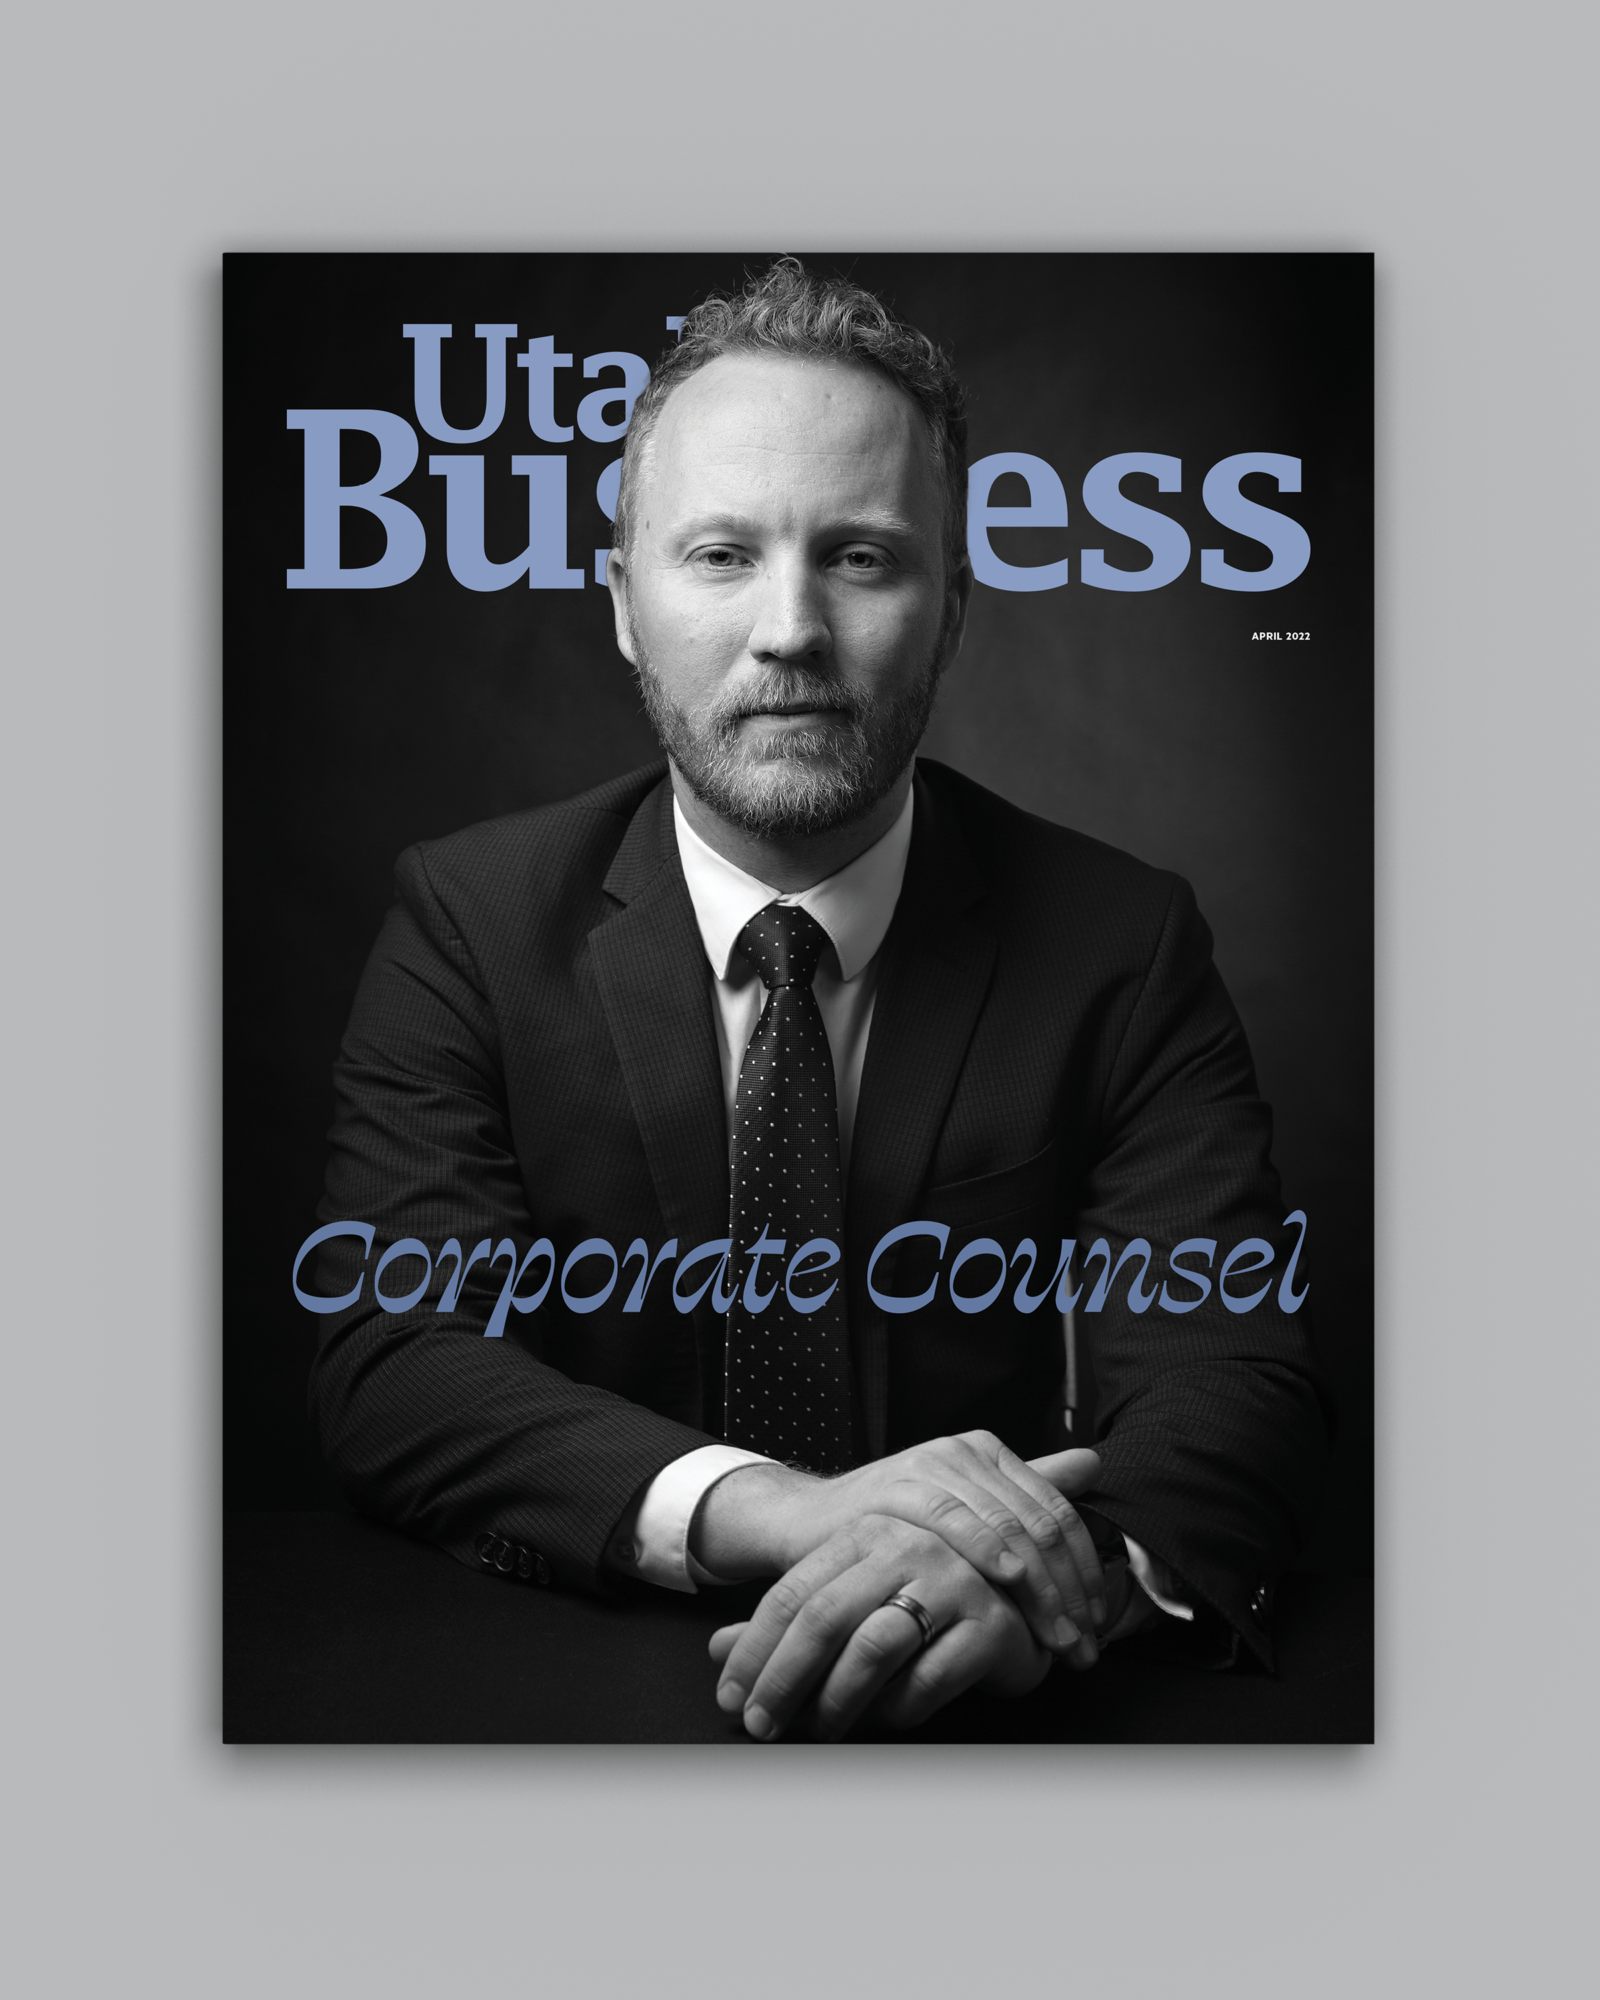 The Utah Business March 2022 features the 2022 Corporate Counsel honorees, a feature about psychedelics in Utah, and crowdfunding films.